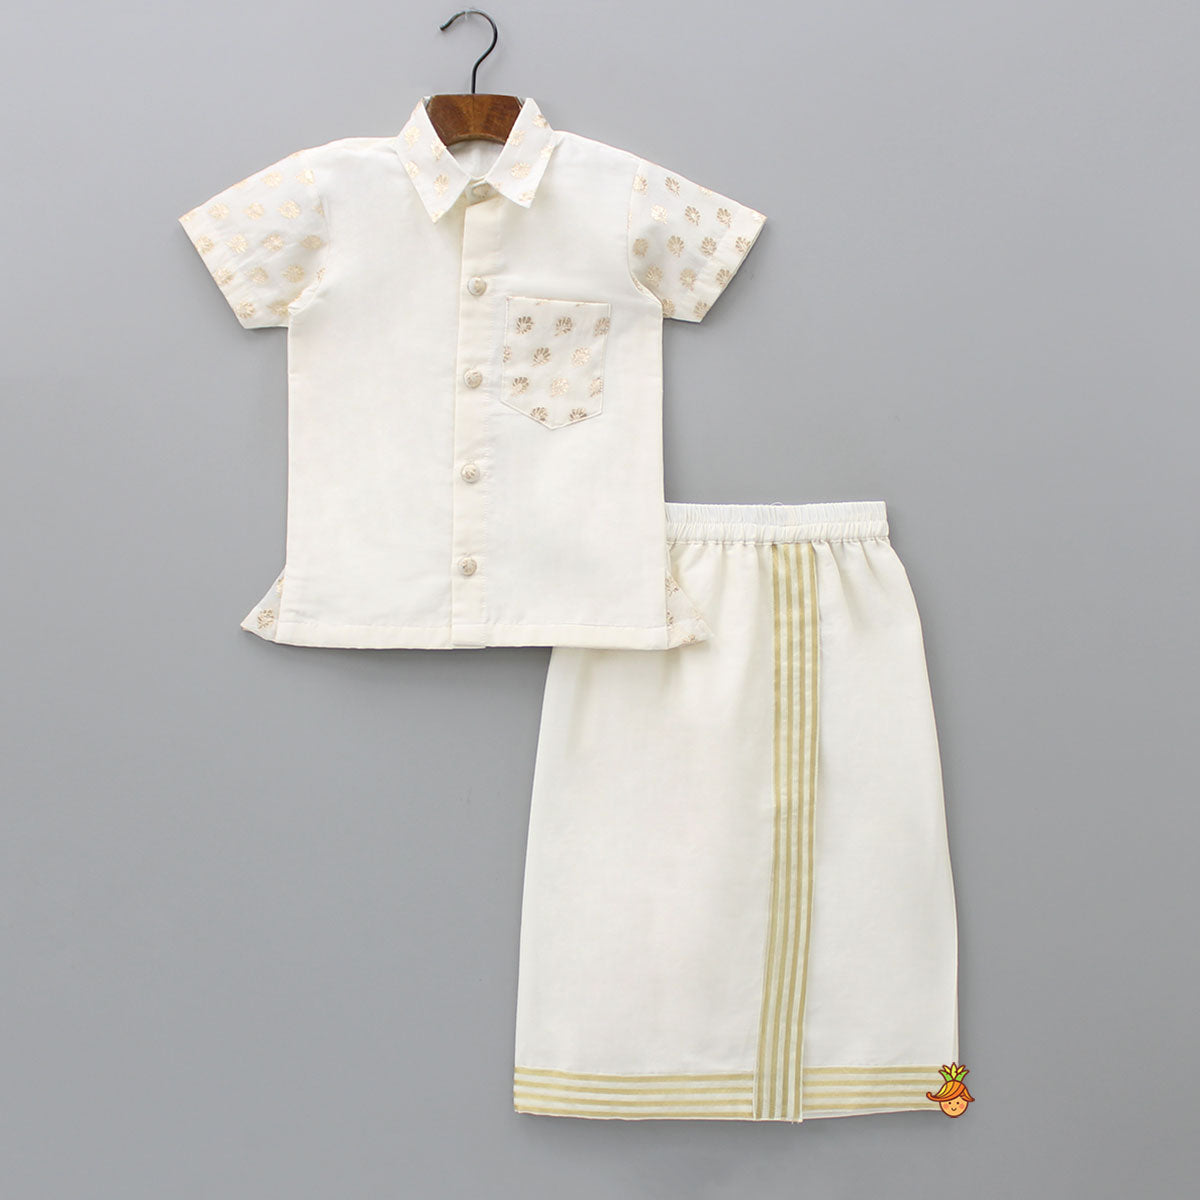 Pre Order: Exquisite Off White Shirt And Stitched Lungi With Shawl